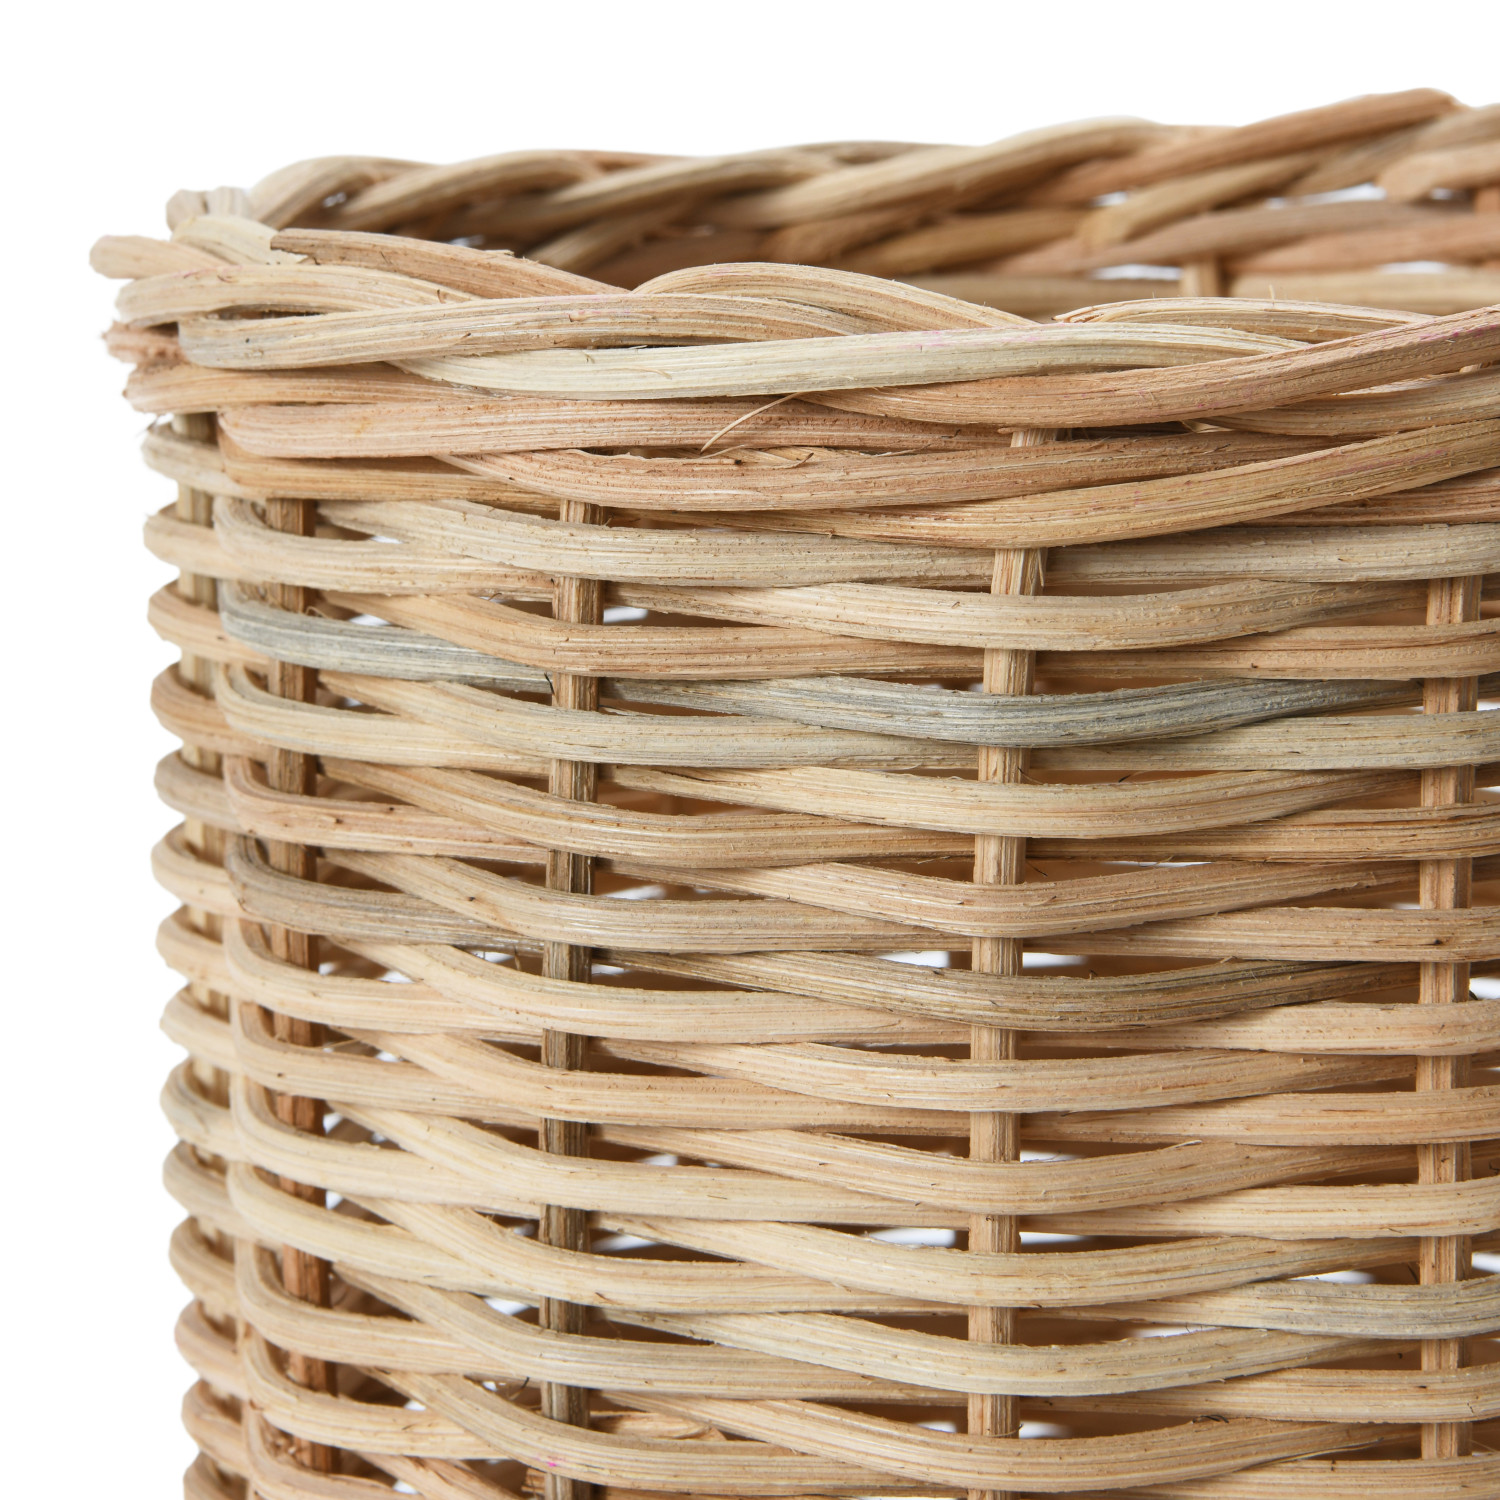 Hand-Woven Wicker Basket/Container, Set of 2